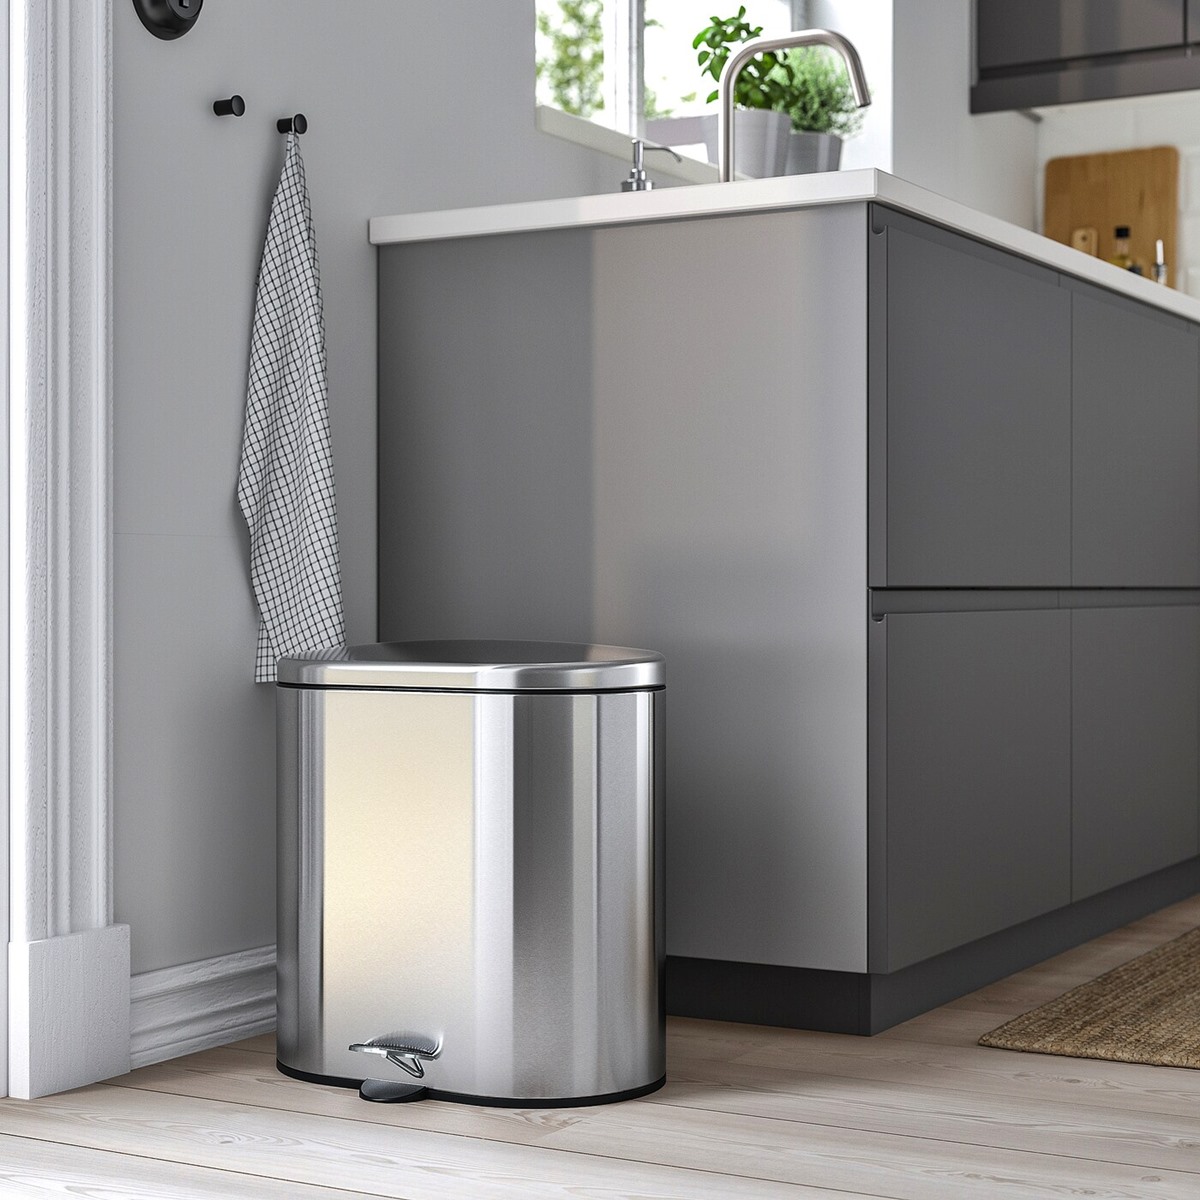 12 Incredible Stainless Steel Kitchen Trash Can For 2023 1697129707 